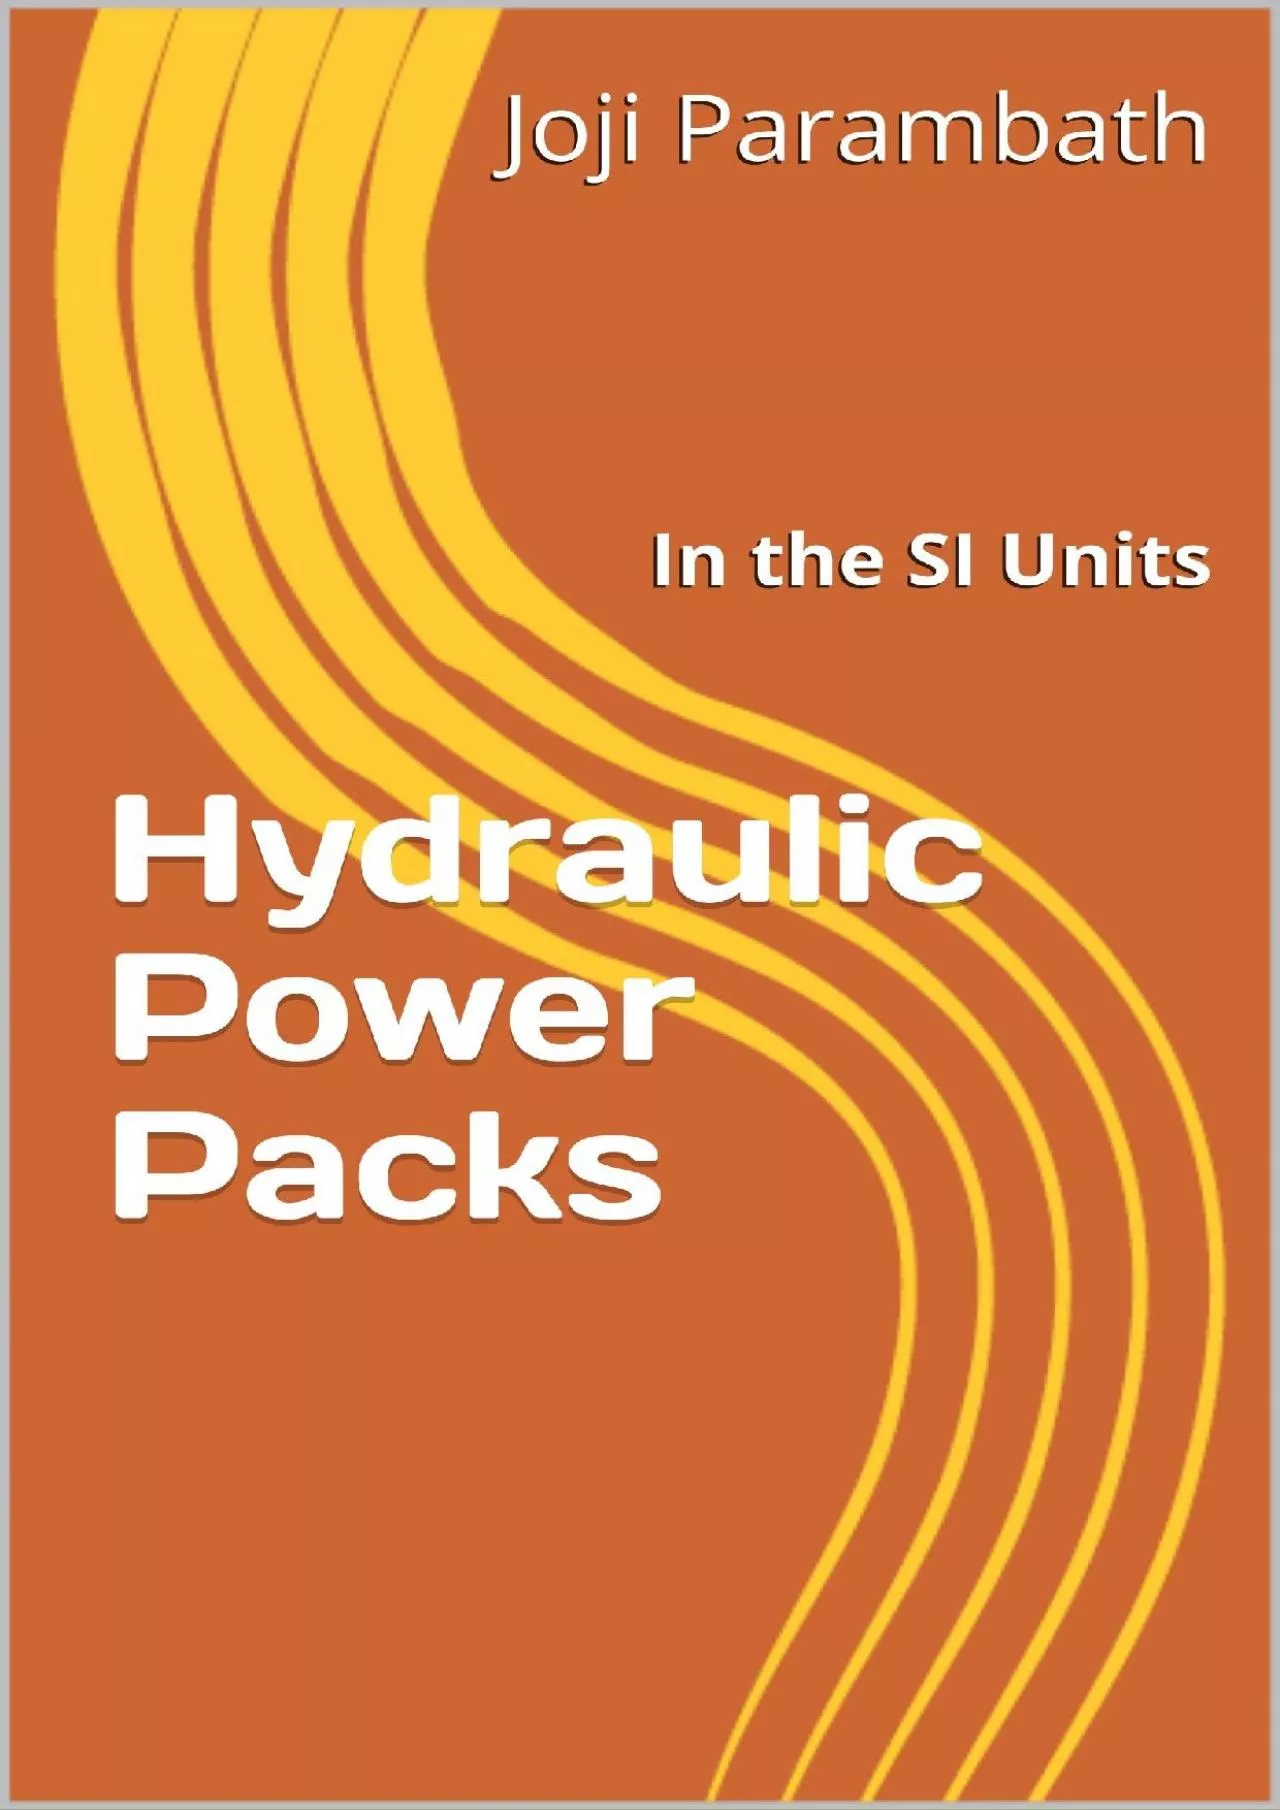 [READ] Hydraulic Power Packs: In the SI Units Industrial Hydraulic Book Series in the